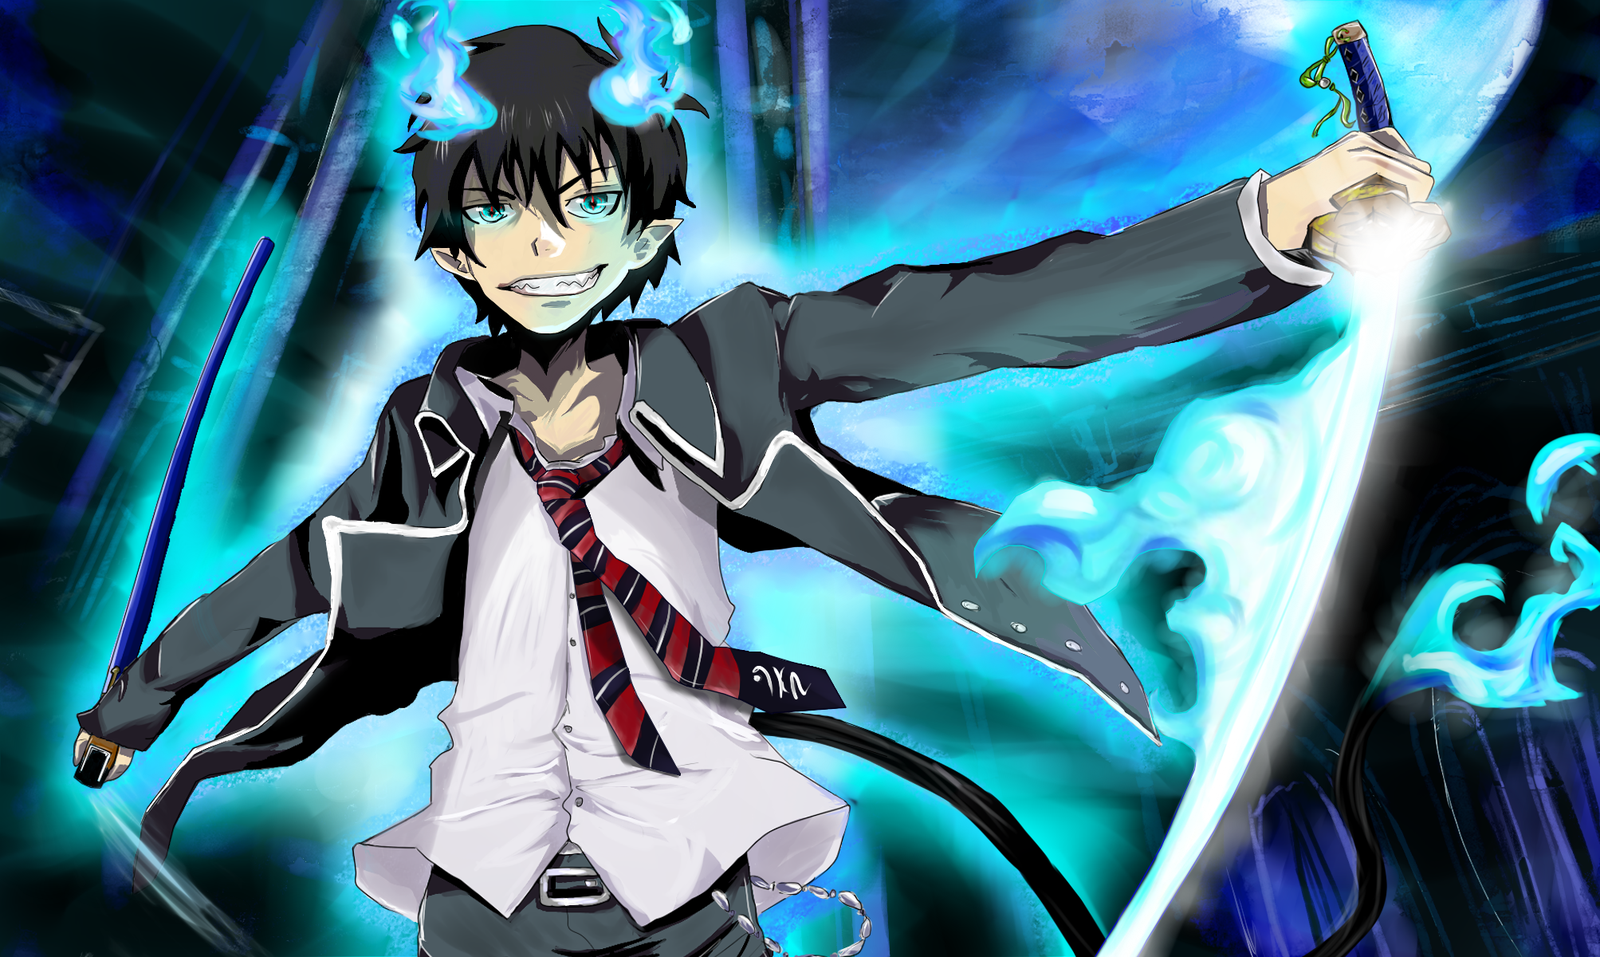 3. Rin Okumura from Blue Exorcist - wide 5